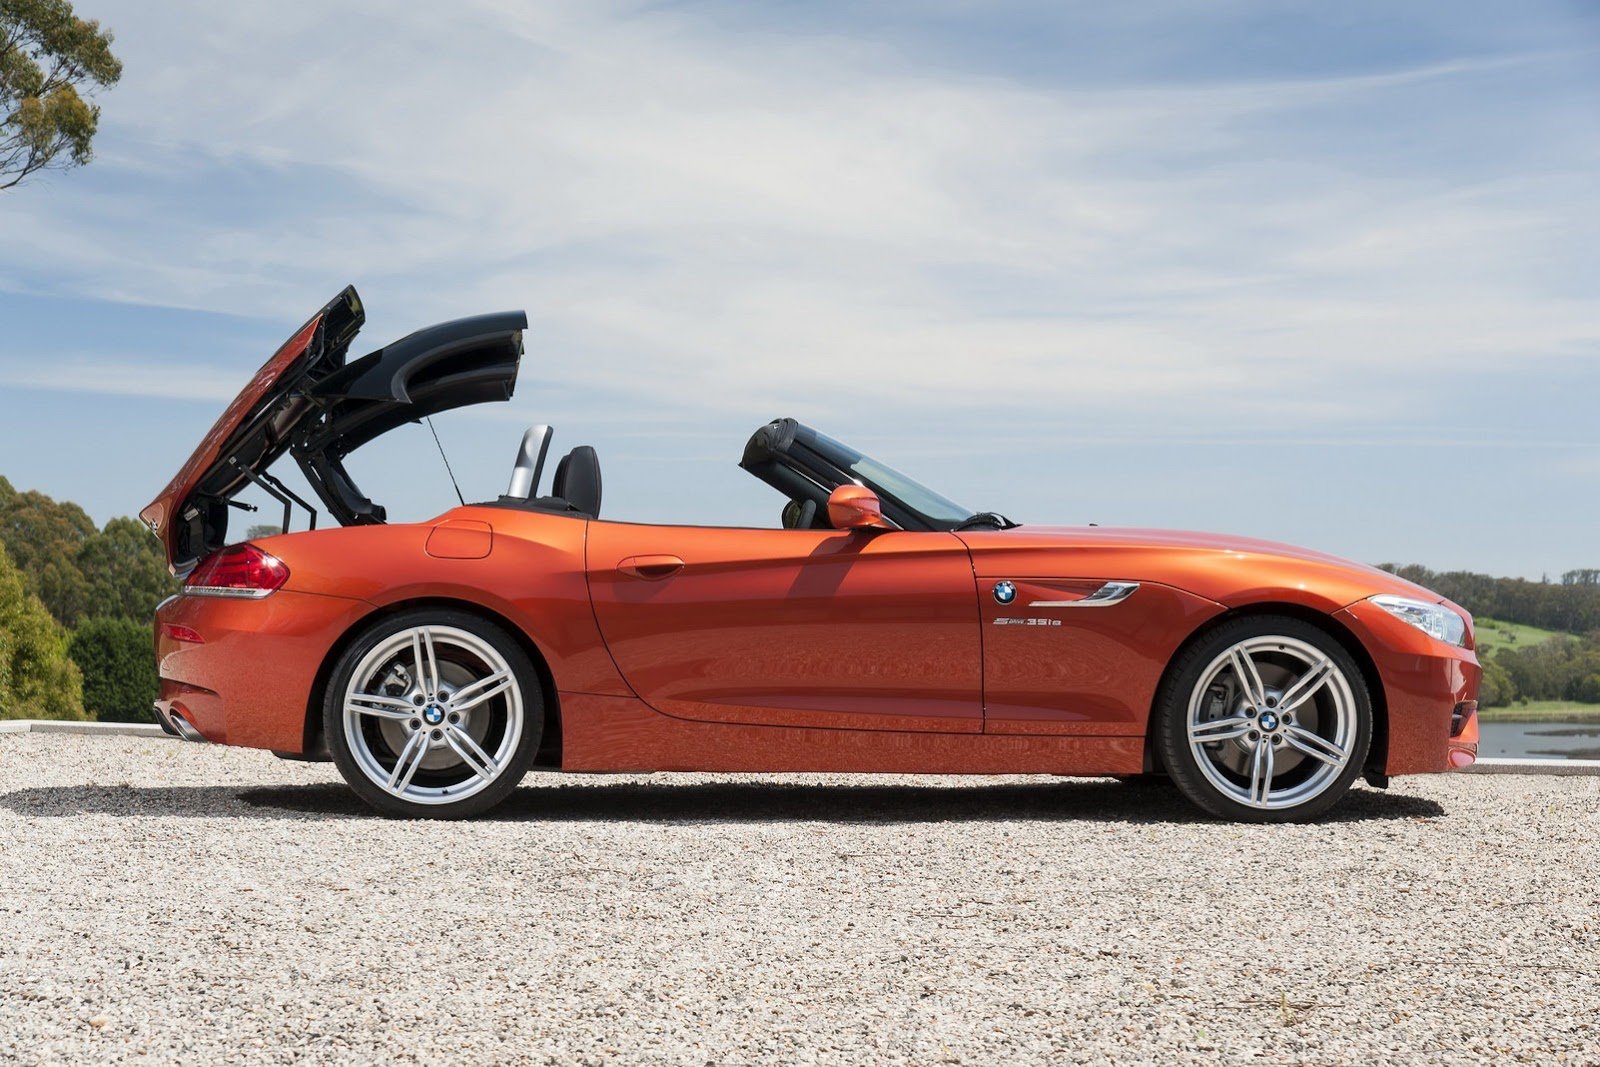 Updated 2014 BMW Z4 Roadster Photos and Details - AutoTribute